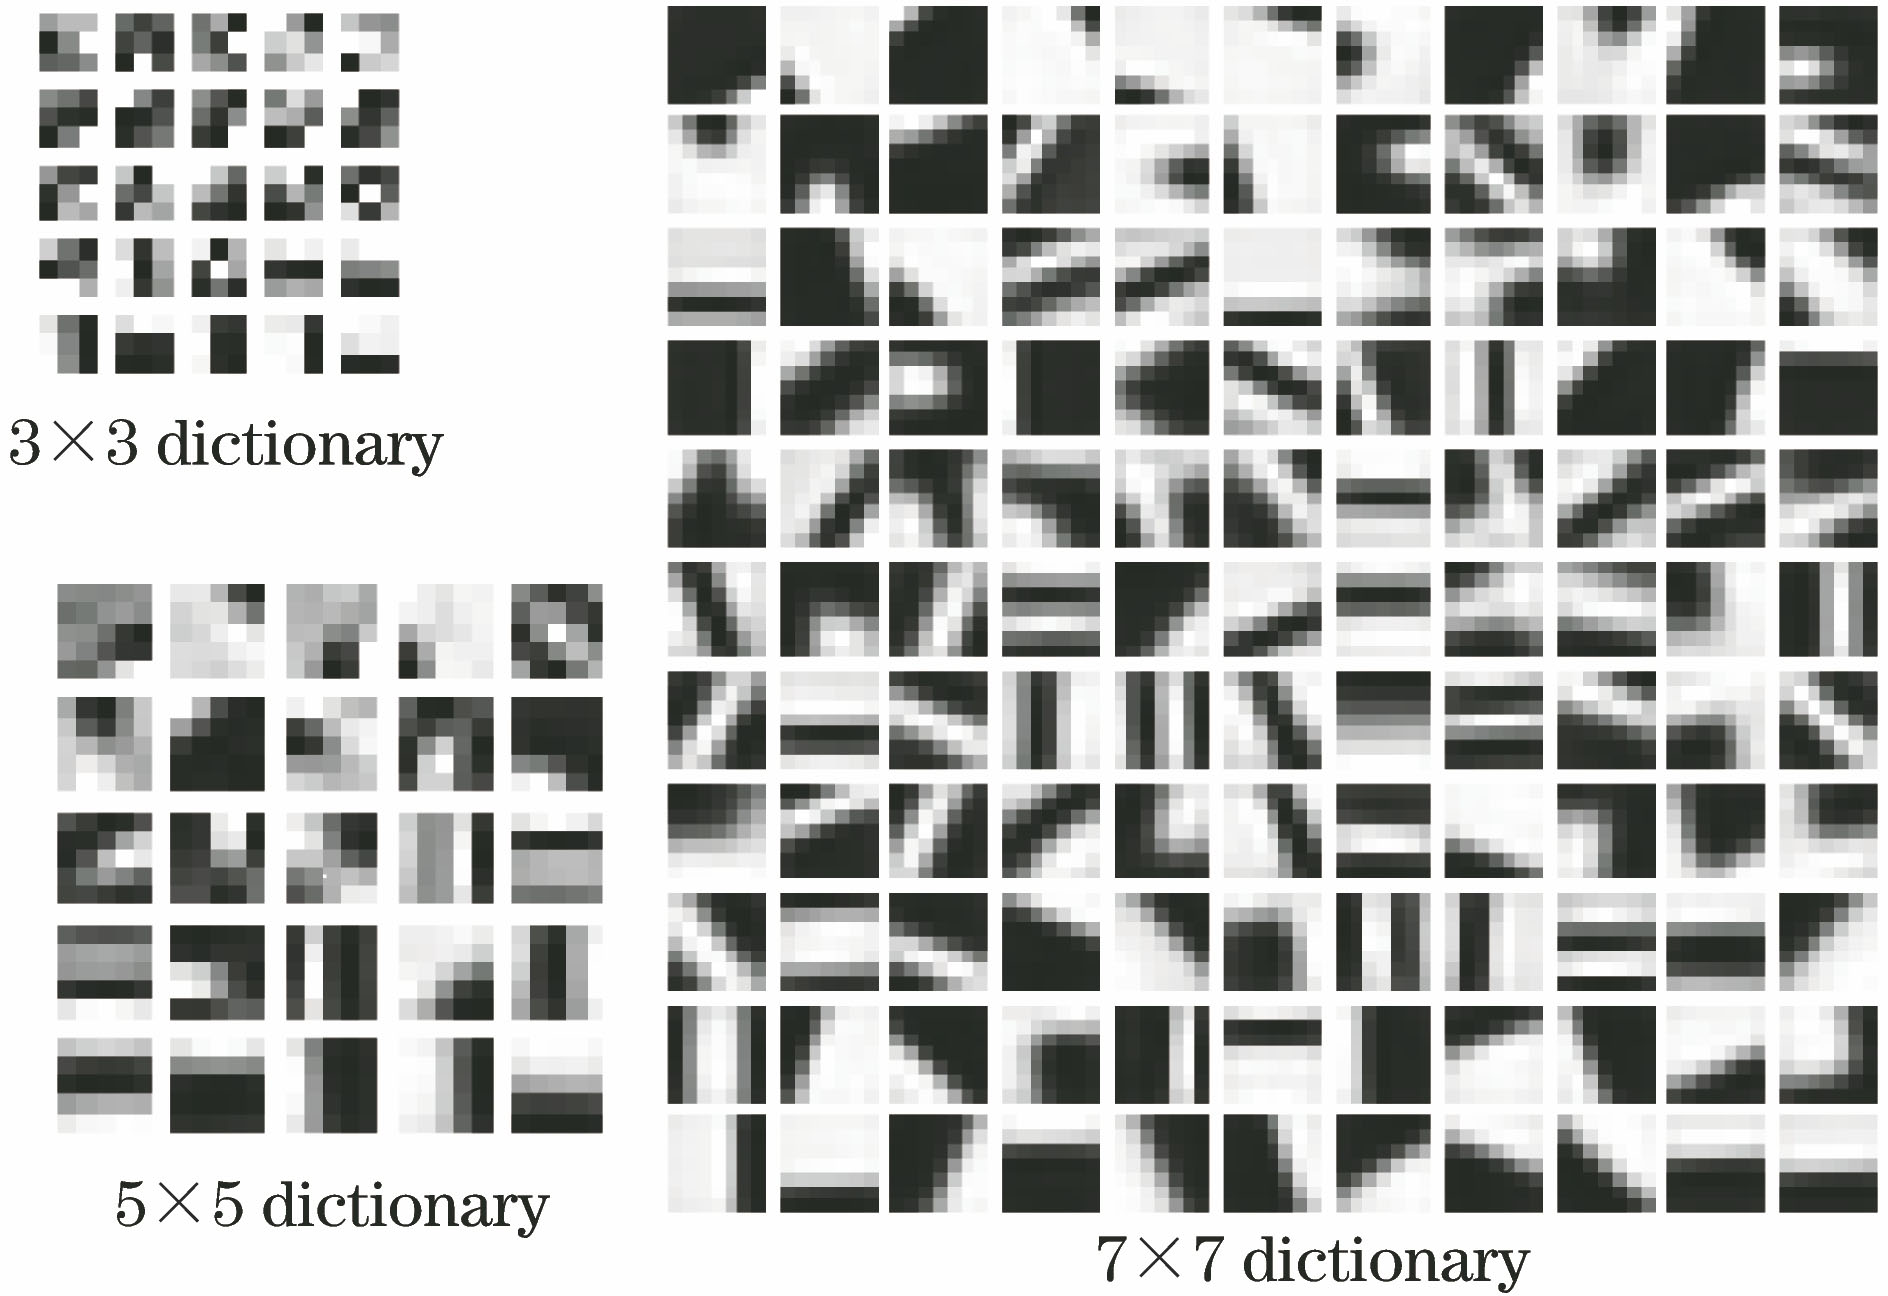 Dictionaries learned through K-SVD algorithm for three patch sizes